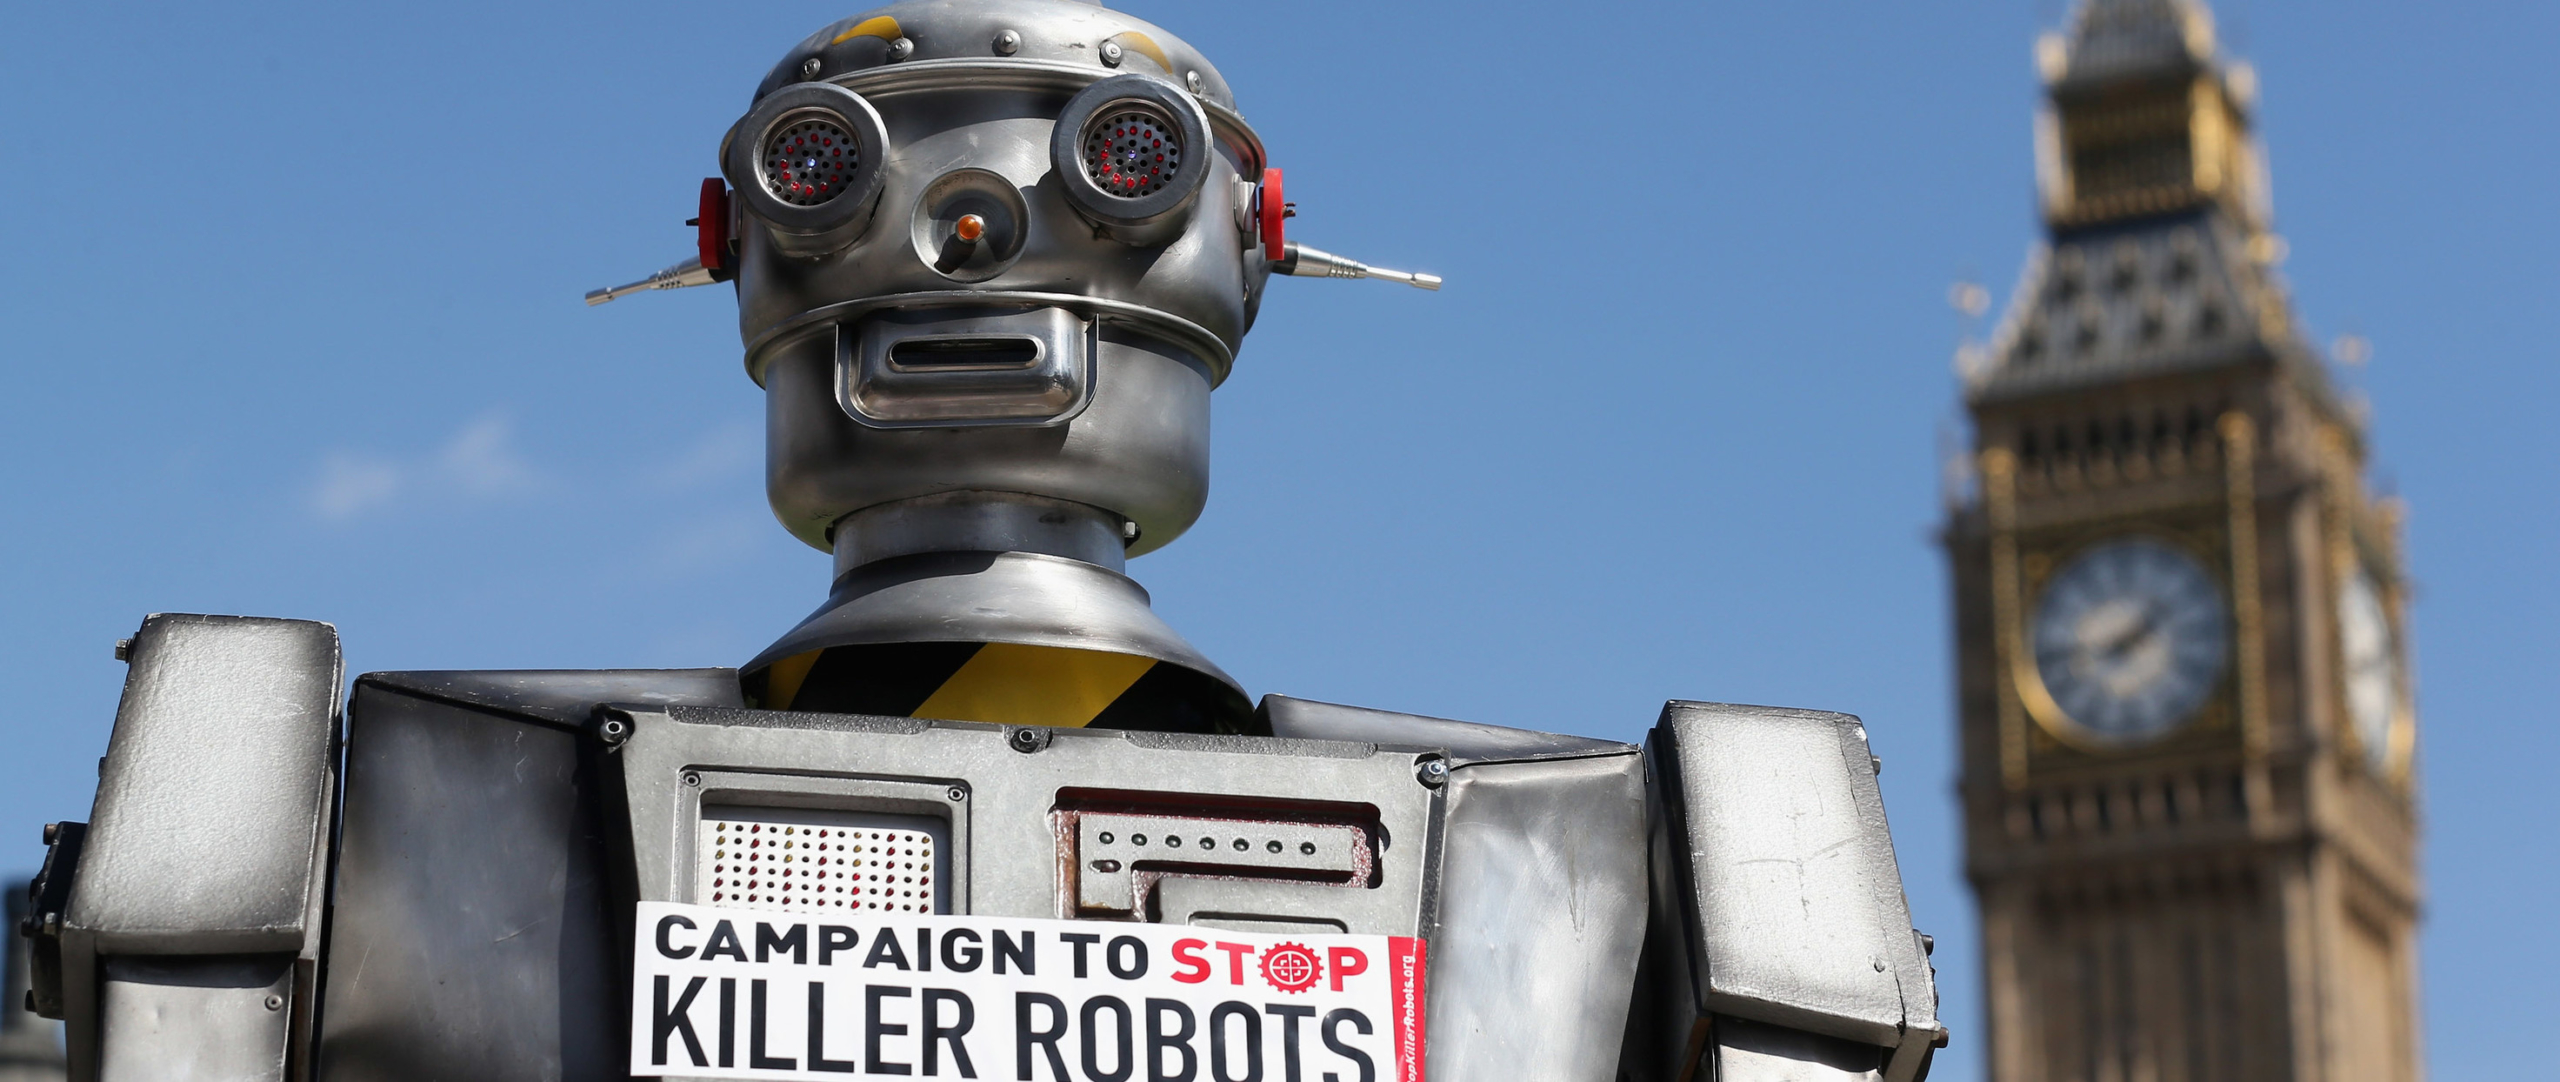 UN: action needed to ban killer robots before it's too late Amnesty International